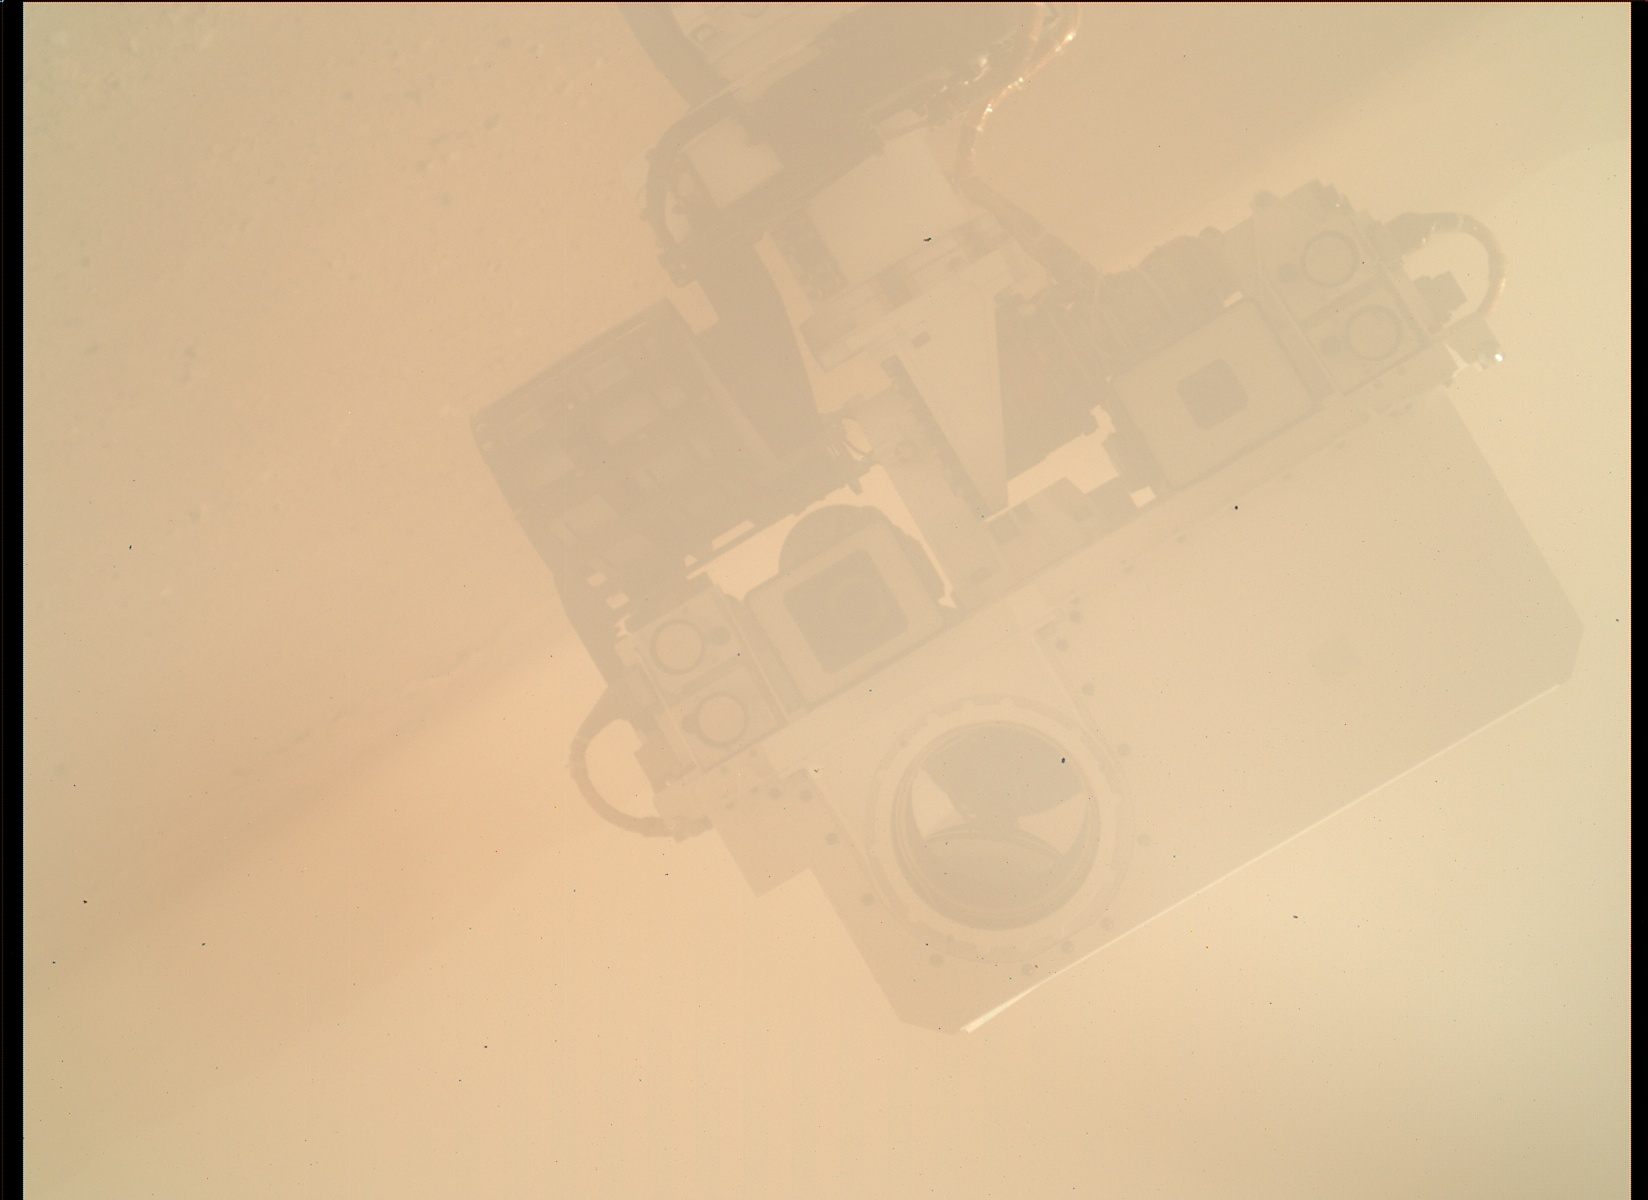 Nasa's Mars rover Curiosity acquired this image using its Mars Hand Lens Imager (MAHLI) on Sol 32